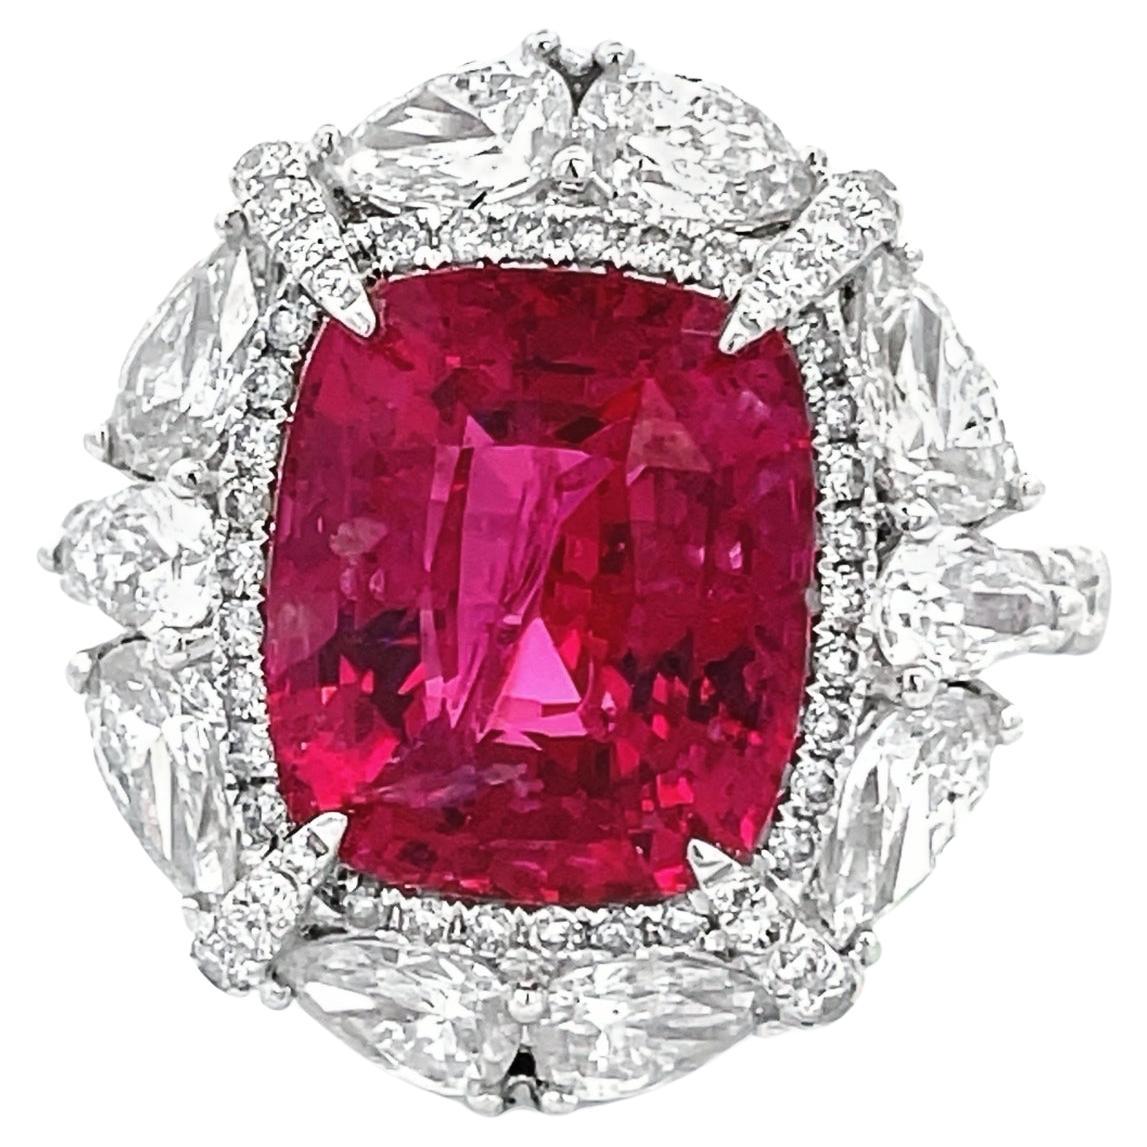 AGL Certified PINK SAPPHIRE CUS 6.07 CT. WHITE DIA (MIX SHAPE) 2.23CT 18KW RING